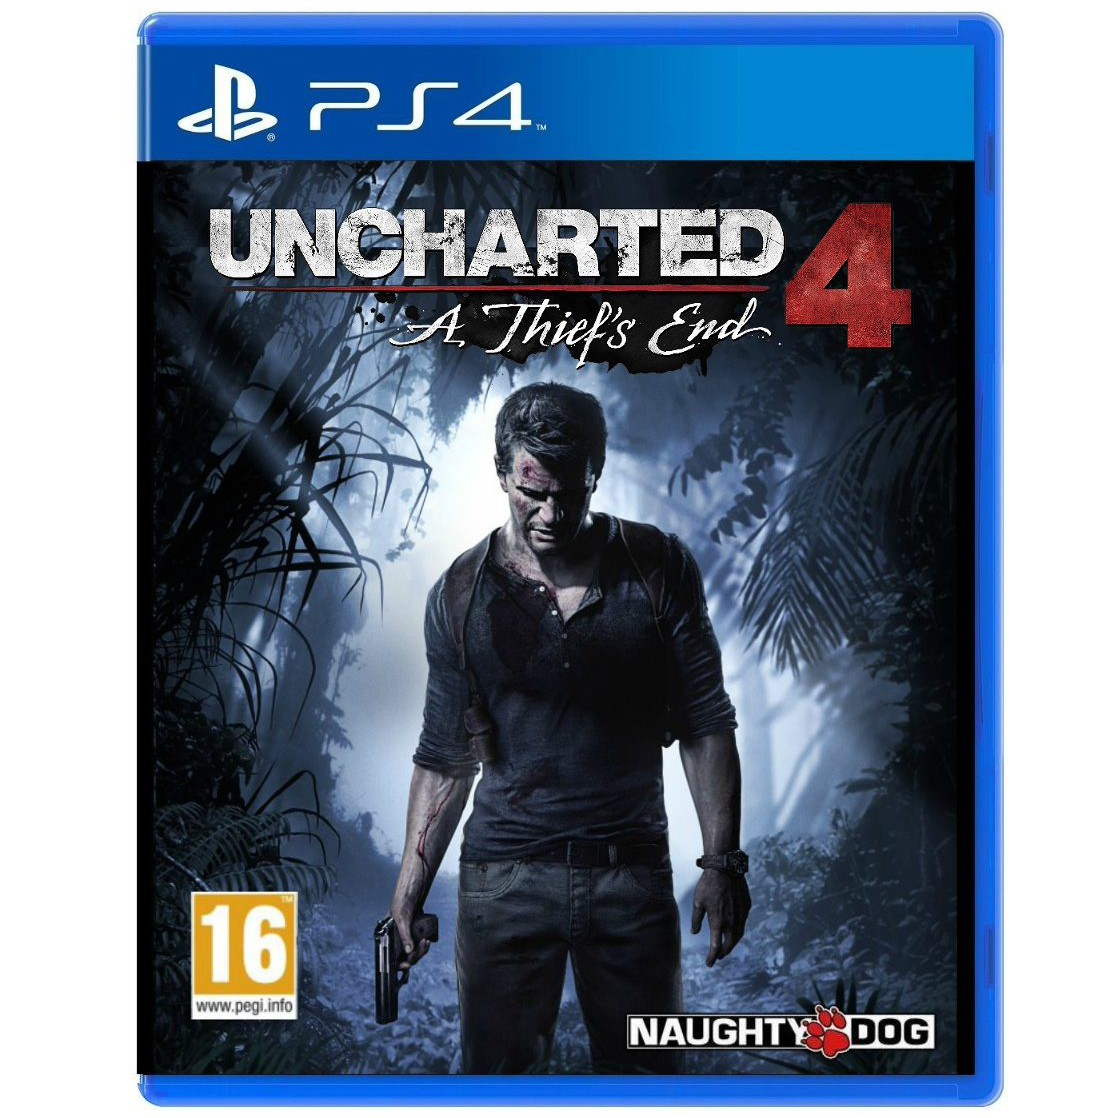 UNCHARTED 4 PS4, PS4 Jogos